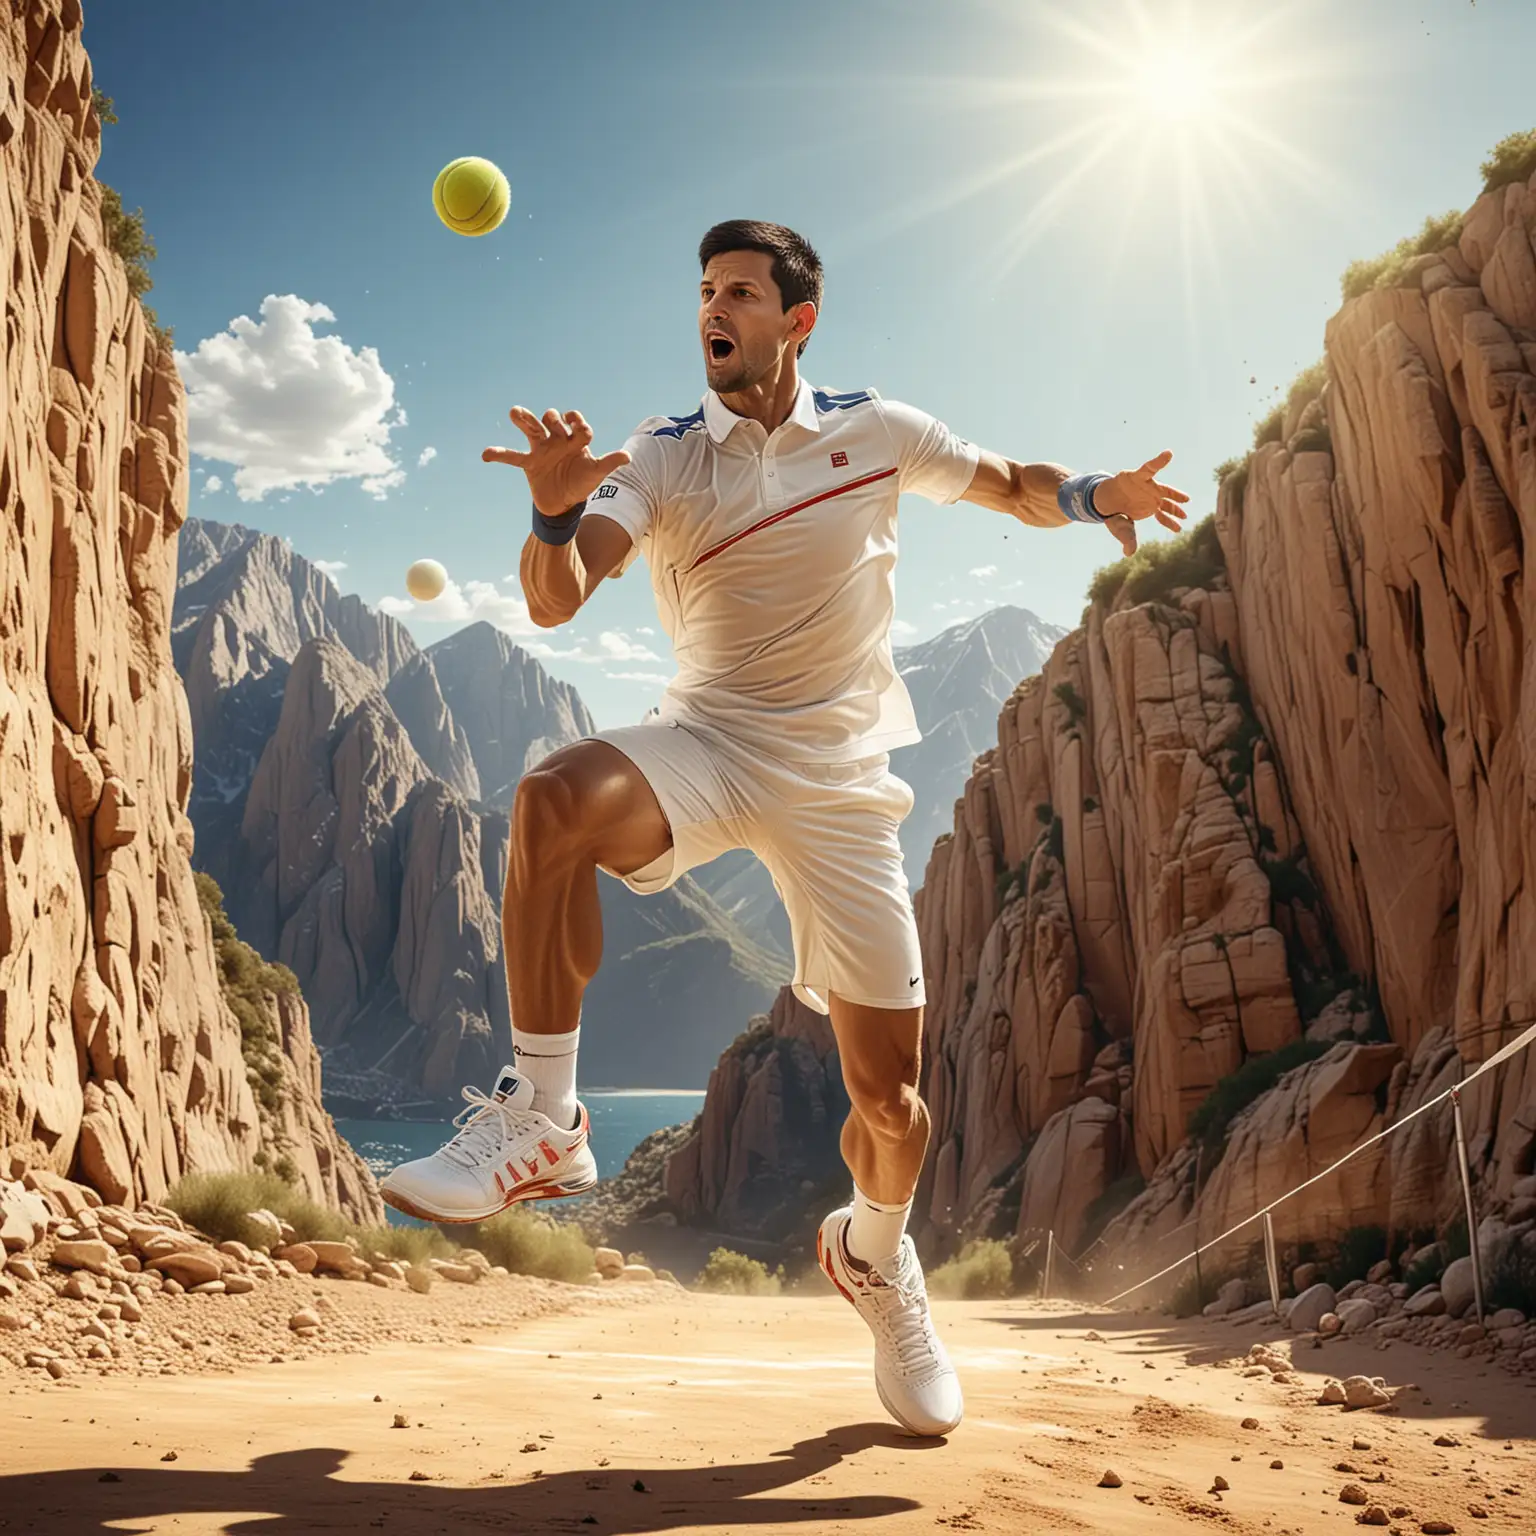 Tennis Player Djokovic , jumps of a Clif and hit the tennis ball , high detailed, sunny day